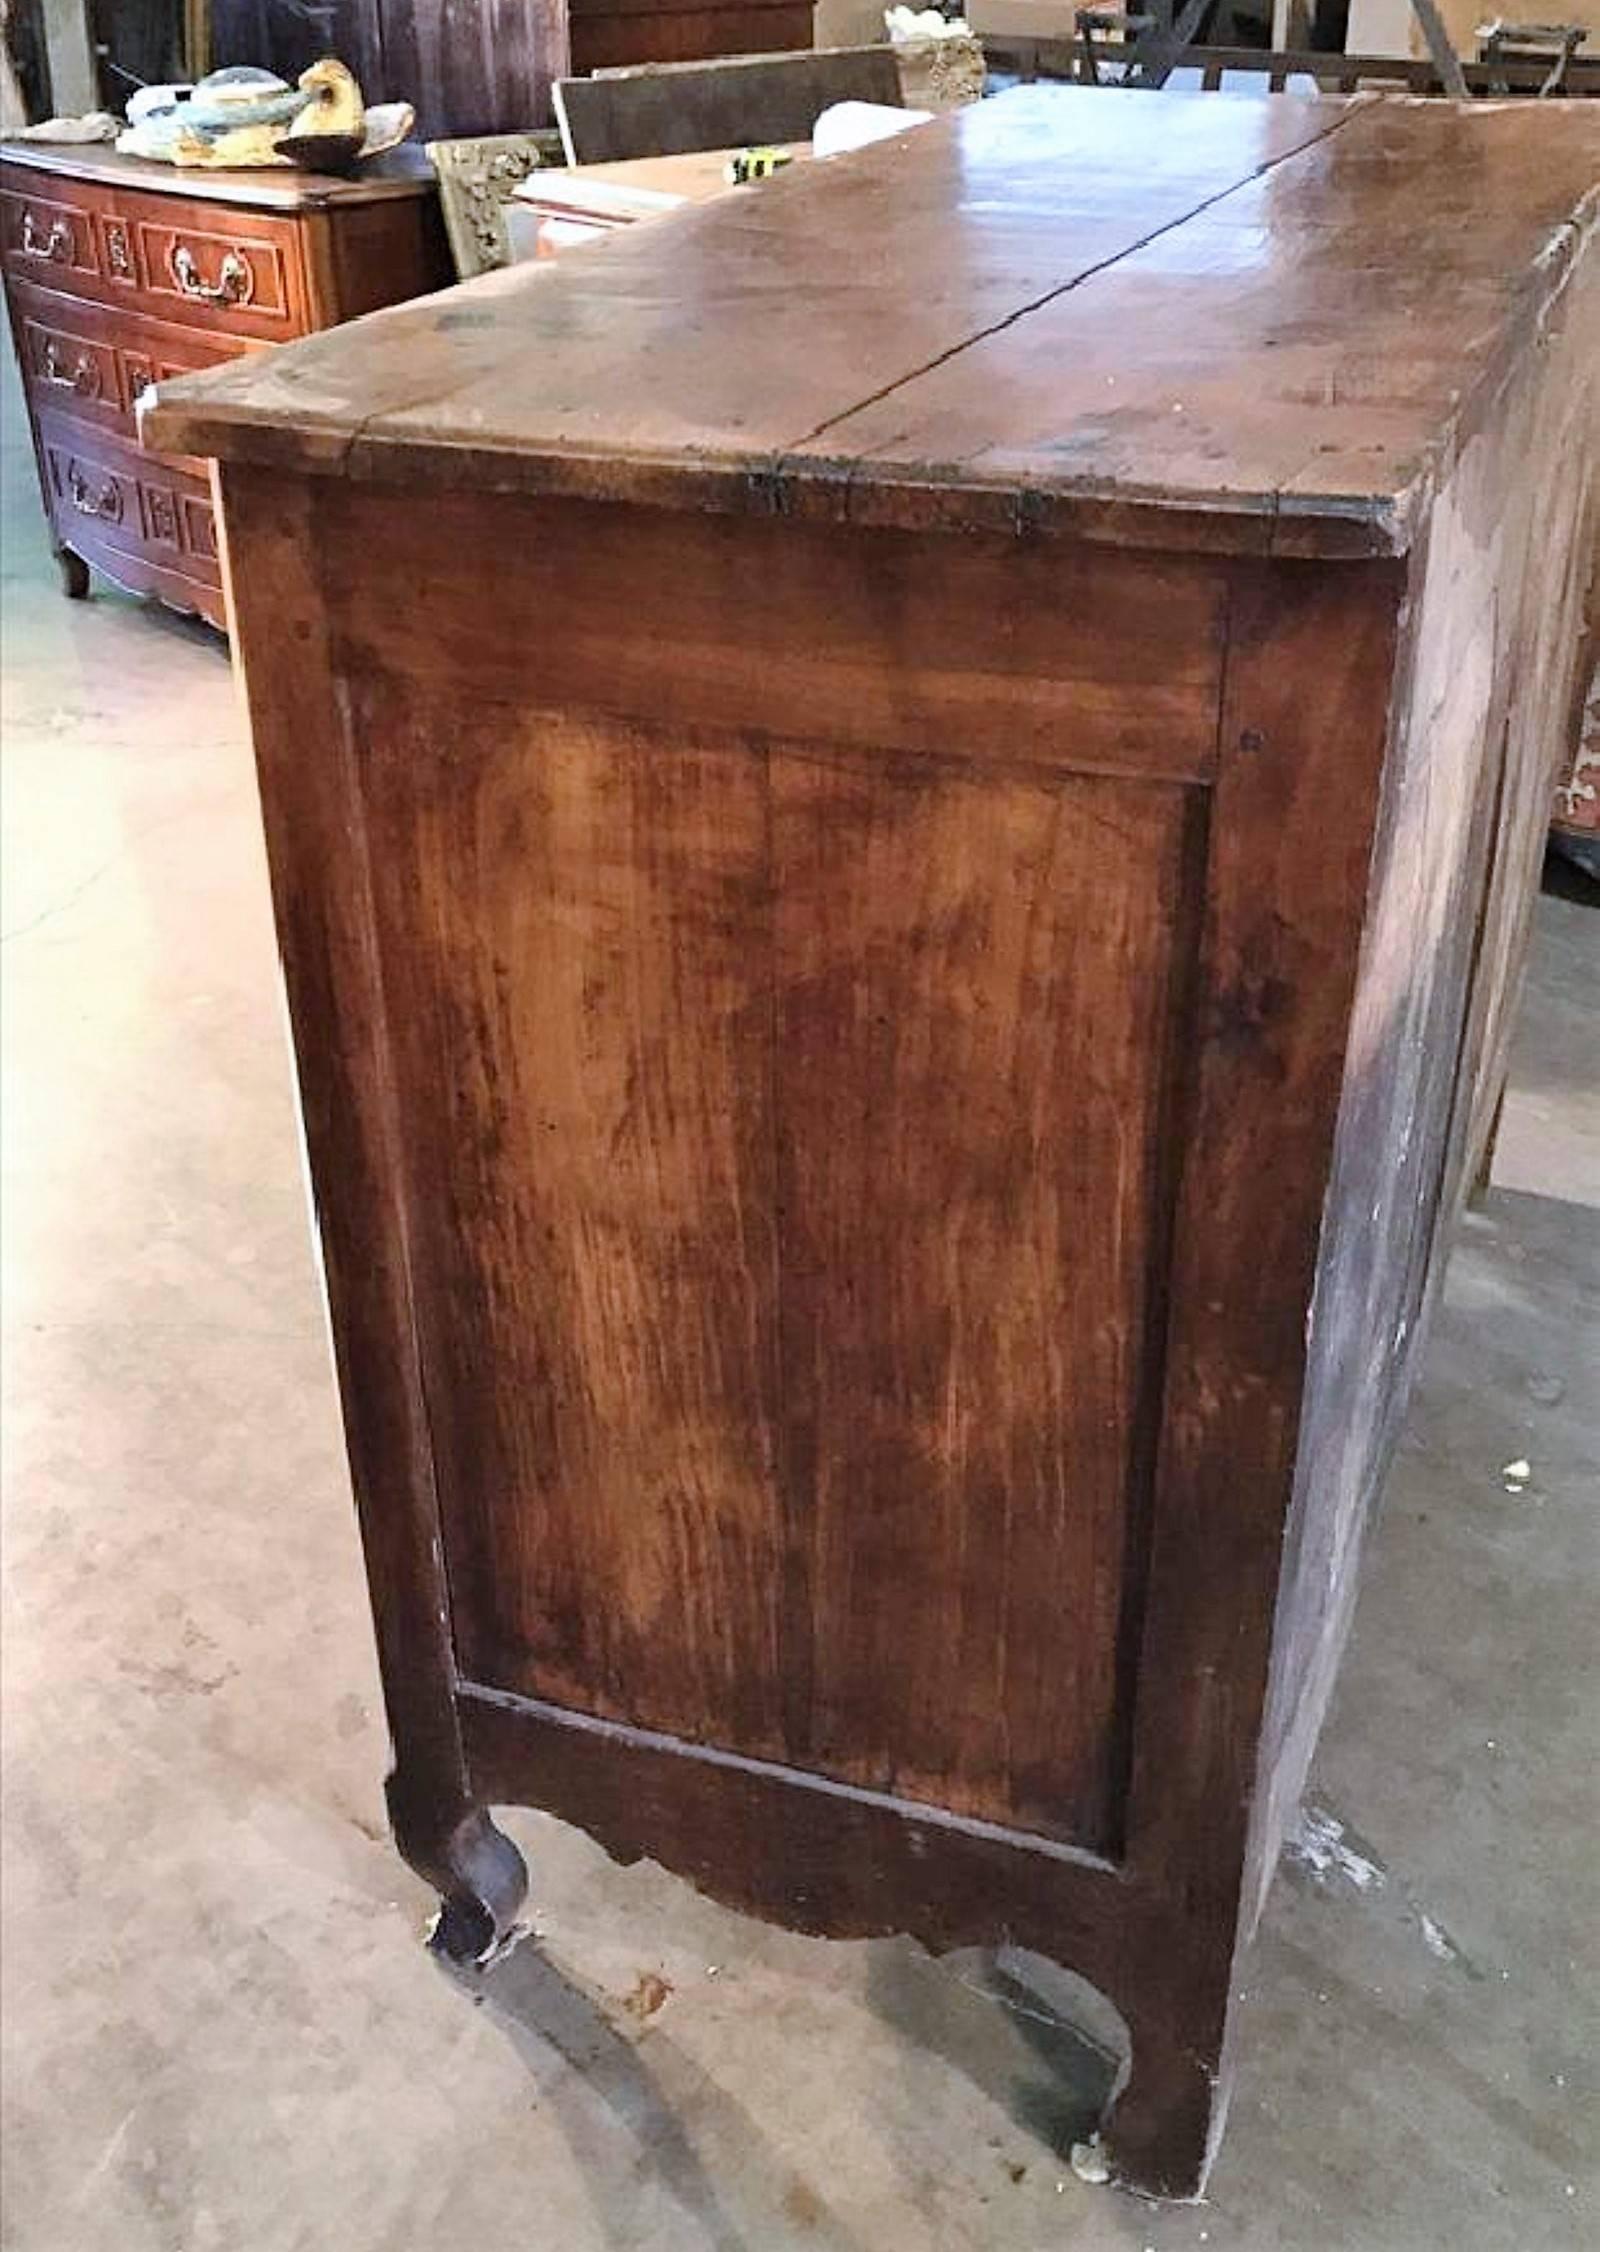 Wonderfully aged 18th century French Provincial or Country French cherry wood buffet or server.

The two drawer frieze above two cupboards with shaped inset panels. The skirt nicely shaped and hand-carved. The entire on cabriole